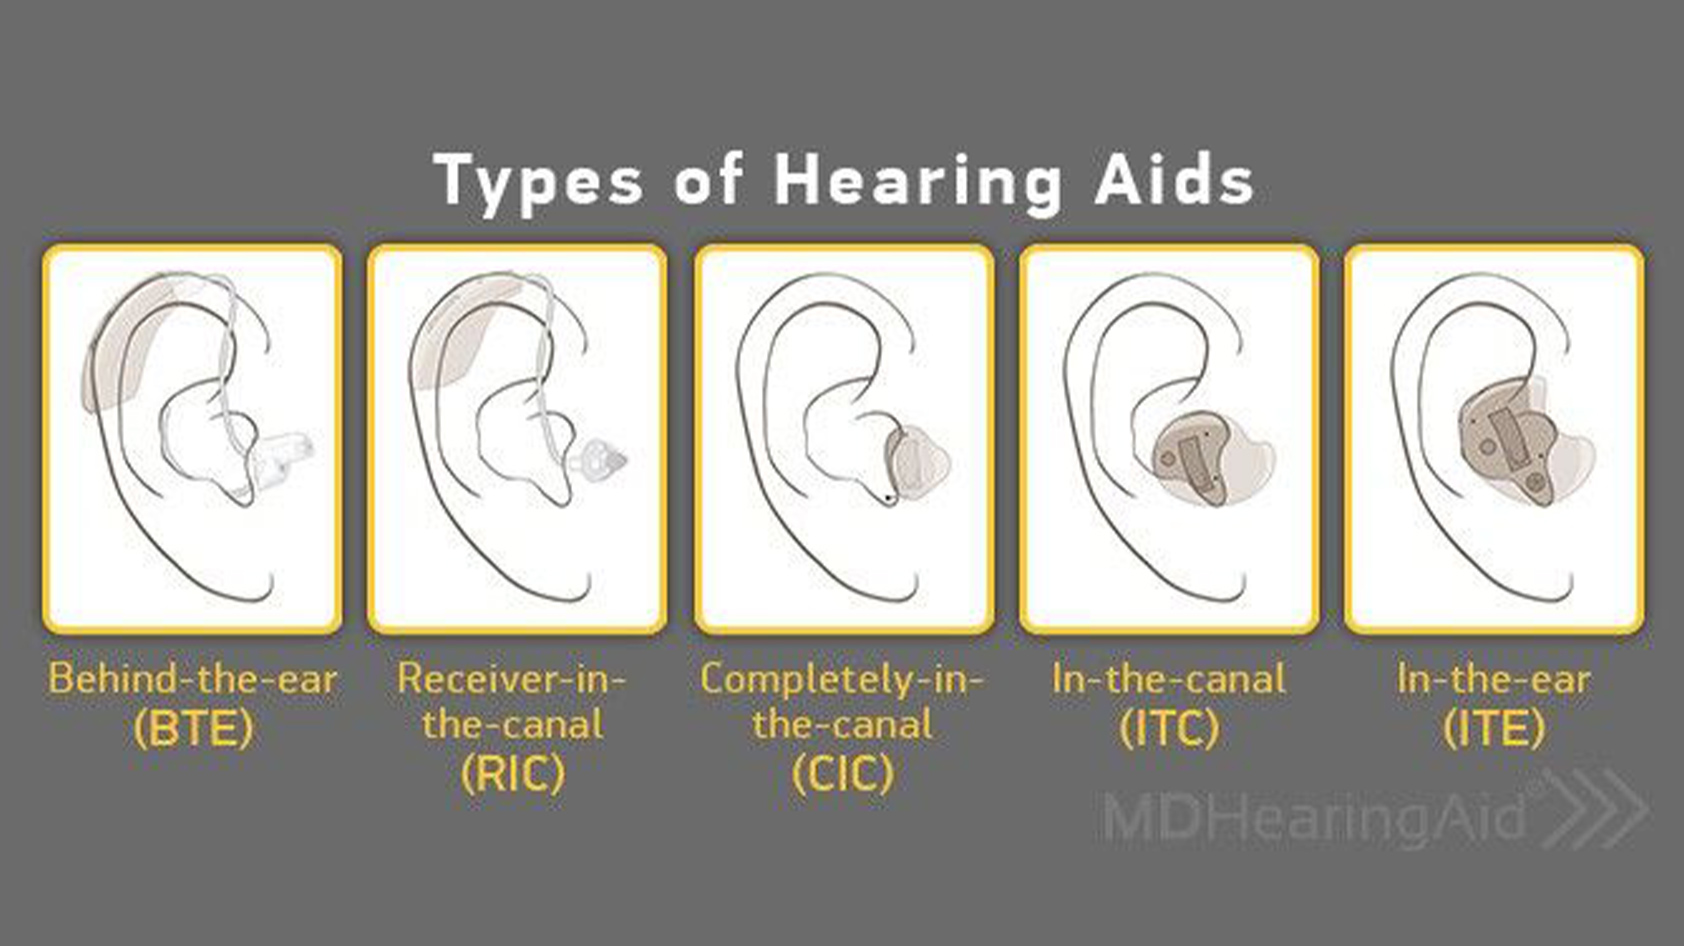 An overview of the most common types of hearing aids.